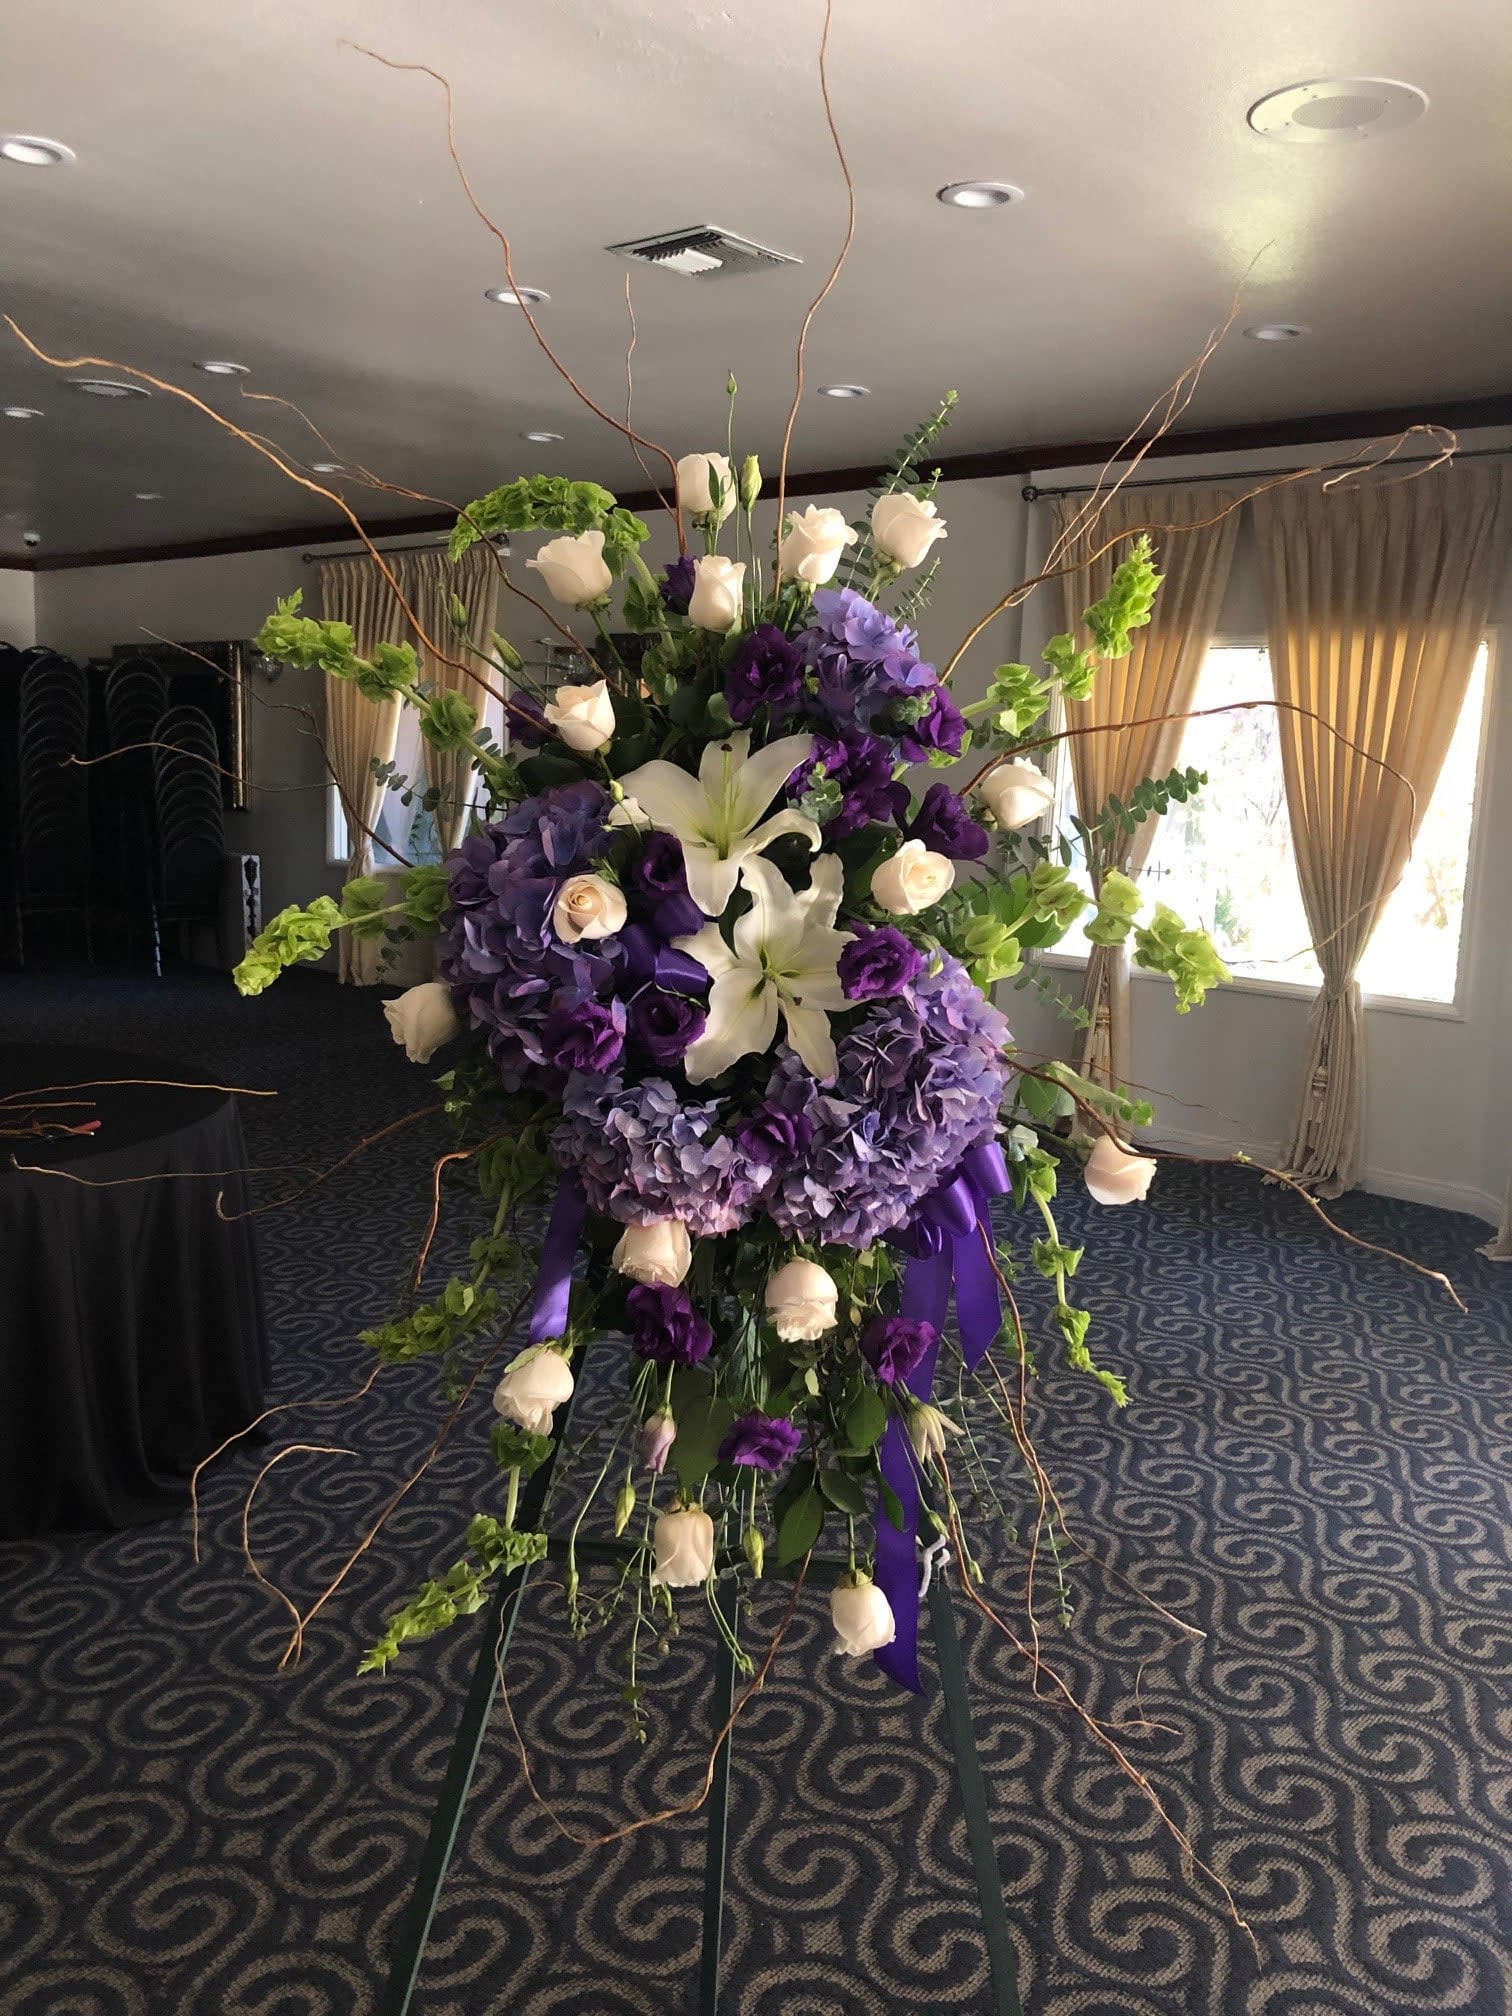 Purple and White Sympathy Spray Piece  - Type of Flowers: White Roses, Purple Hydrangeas, Bells of Ireland, White Asiatic Lilies, White and Purple Lisianthus, Branches, and Ribbon on an easel. Availability: All year round Substitute Available: Yes Design View: All Facing View Photo shown: Regular 